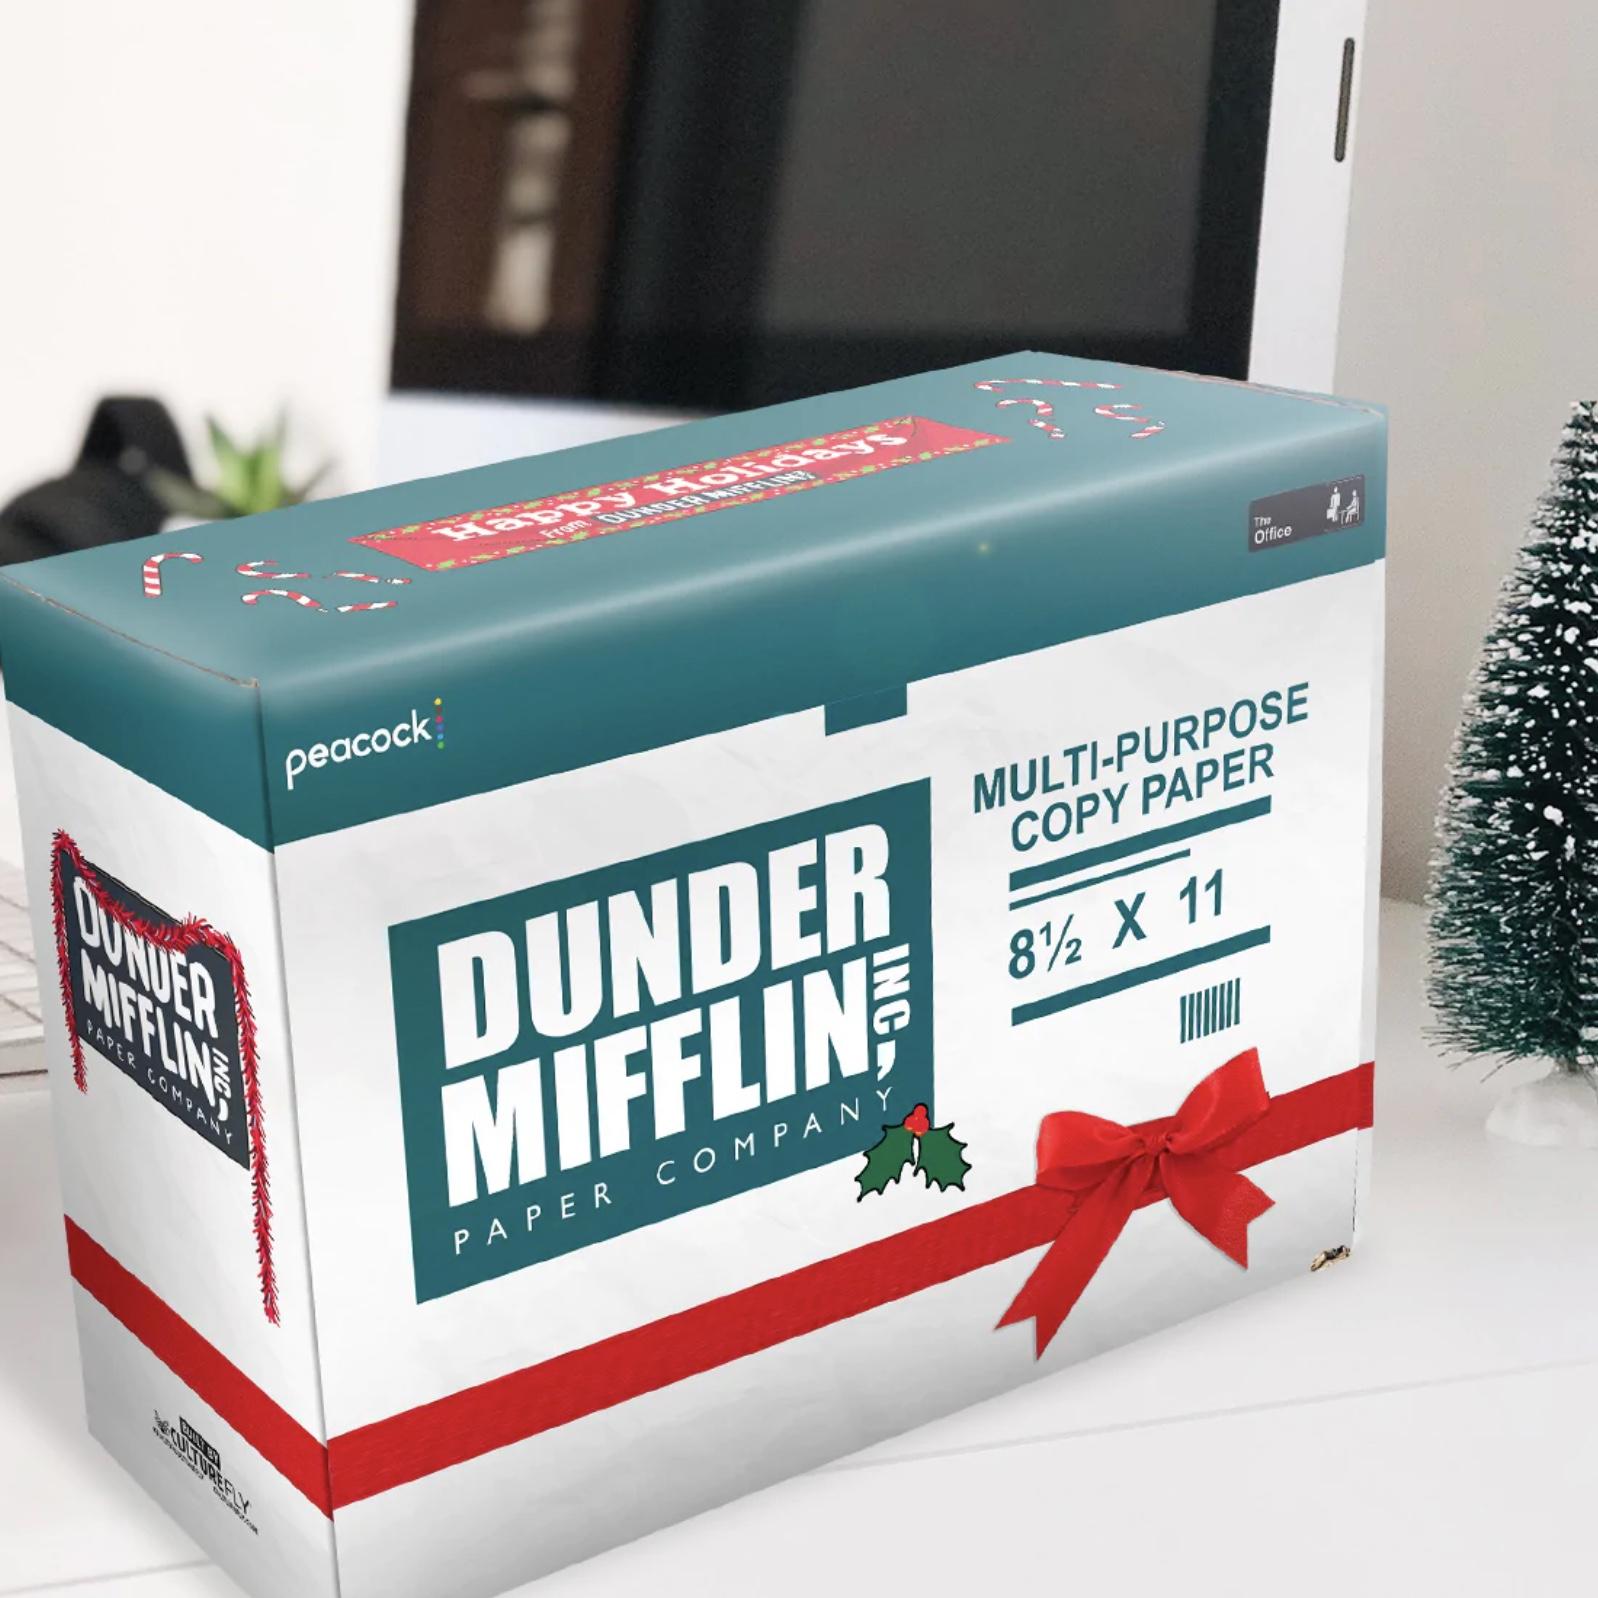 Read more about the article The Office Box from CultureFly Winter 2022 Spoilers #1 & #2